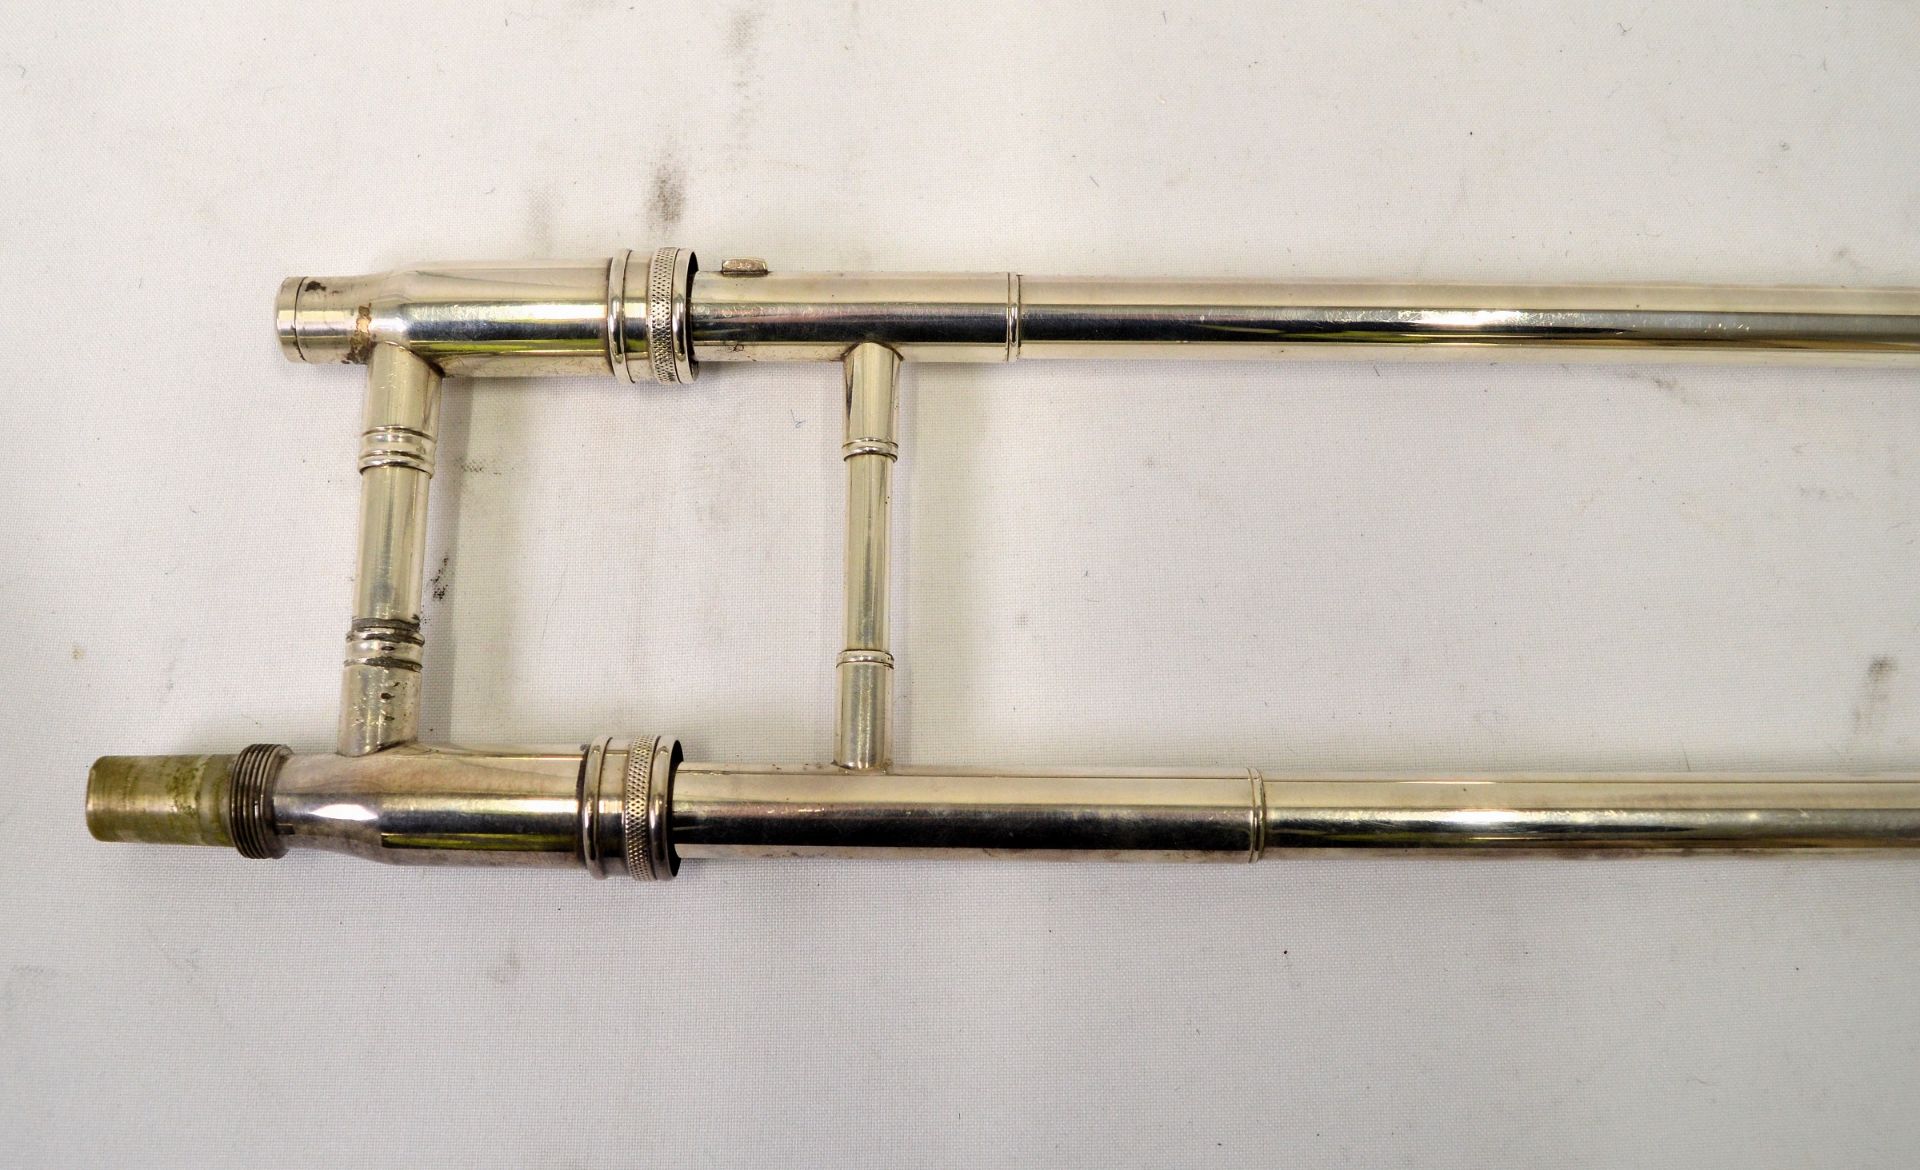 Boosey & Hawkes Trombone with Case. Damage to end of slide tube. Serial No. 655399. - Image 10 of 14